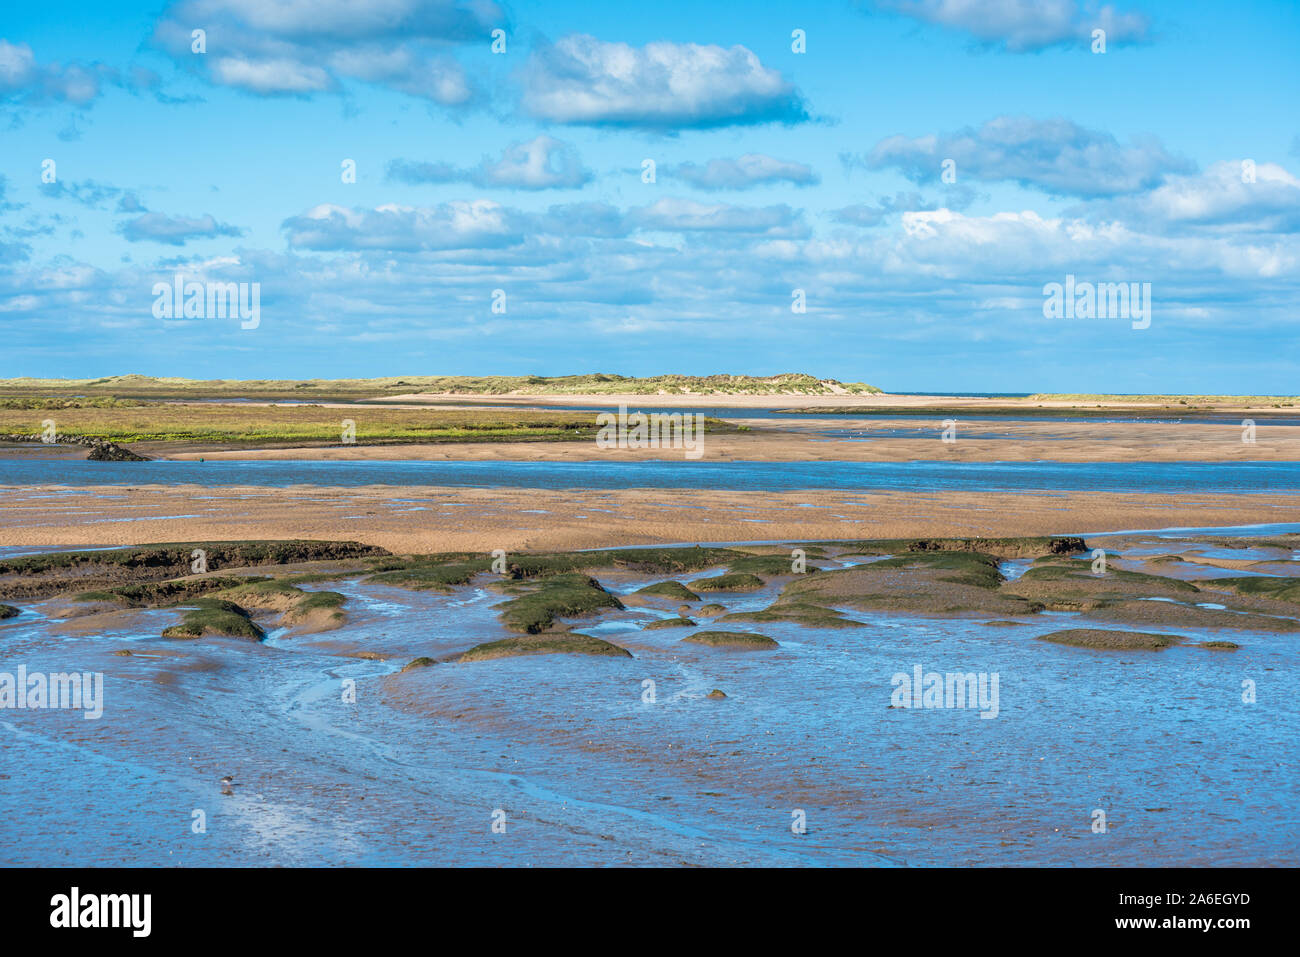 Views of mudflat at low tide from Norfolk Coast path National Trail near Burnham Overy Staithe, Scolt Head Island to rear, East Anglia, England, UK. Stock Photo